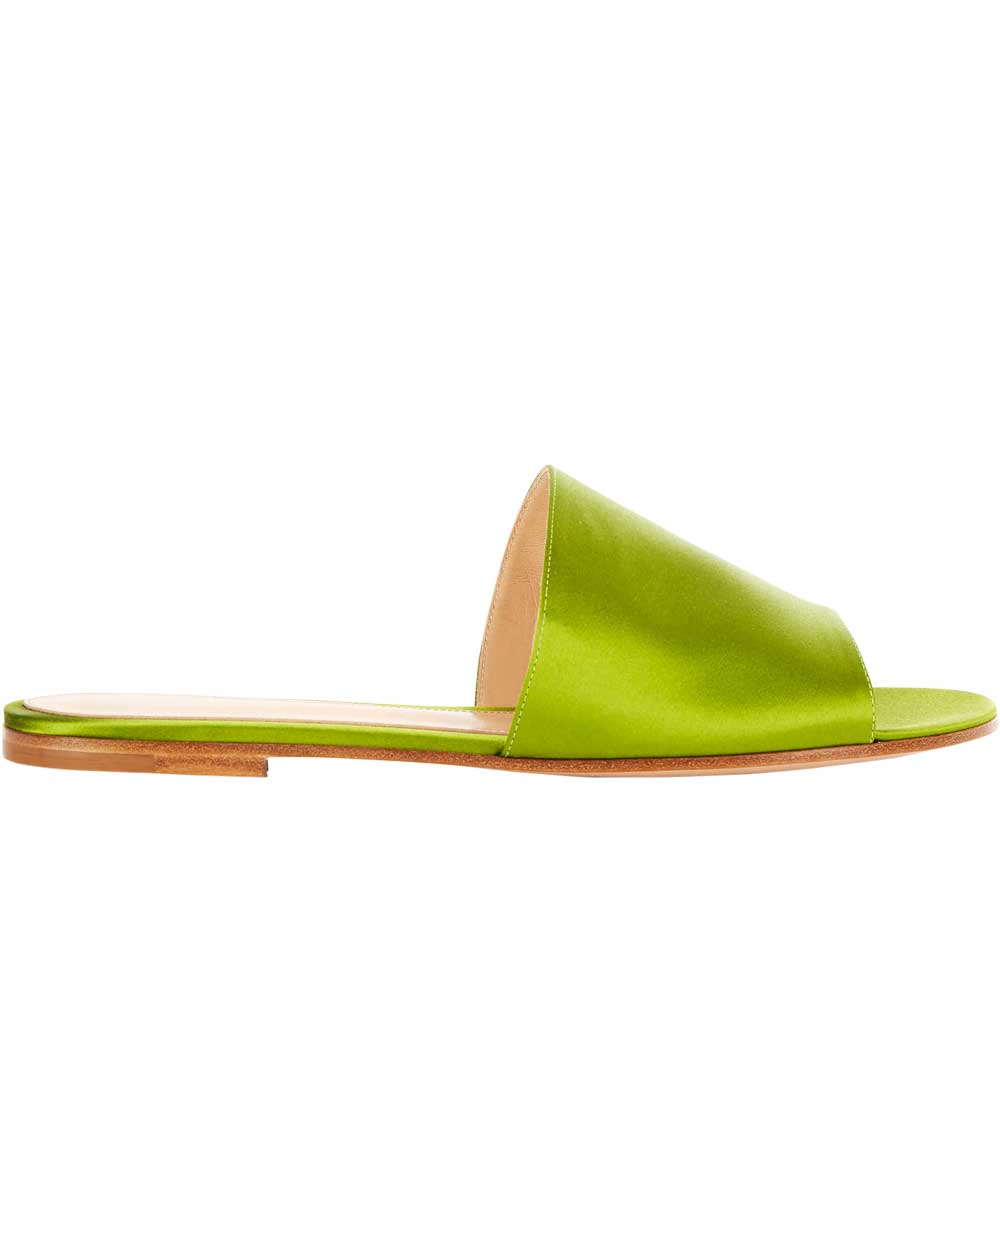 Gianvito Rossi slides, $570, from Matches Fashion